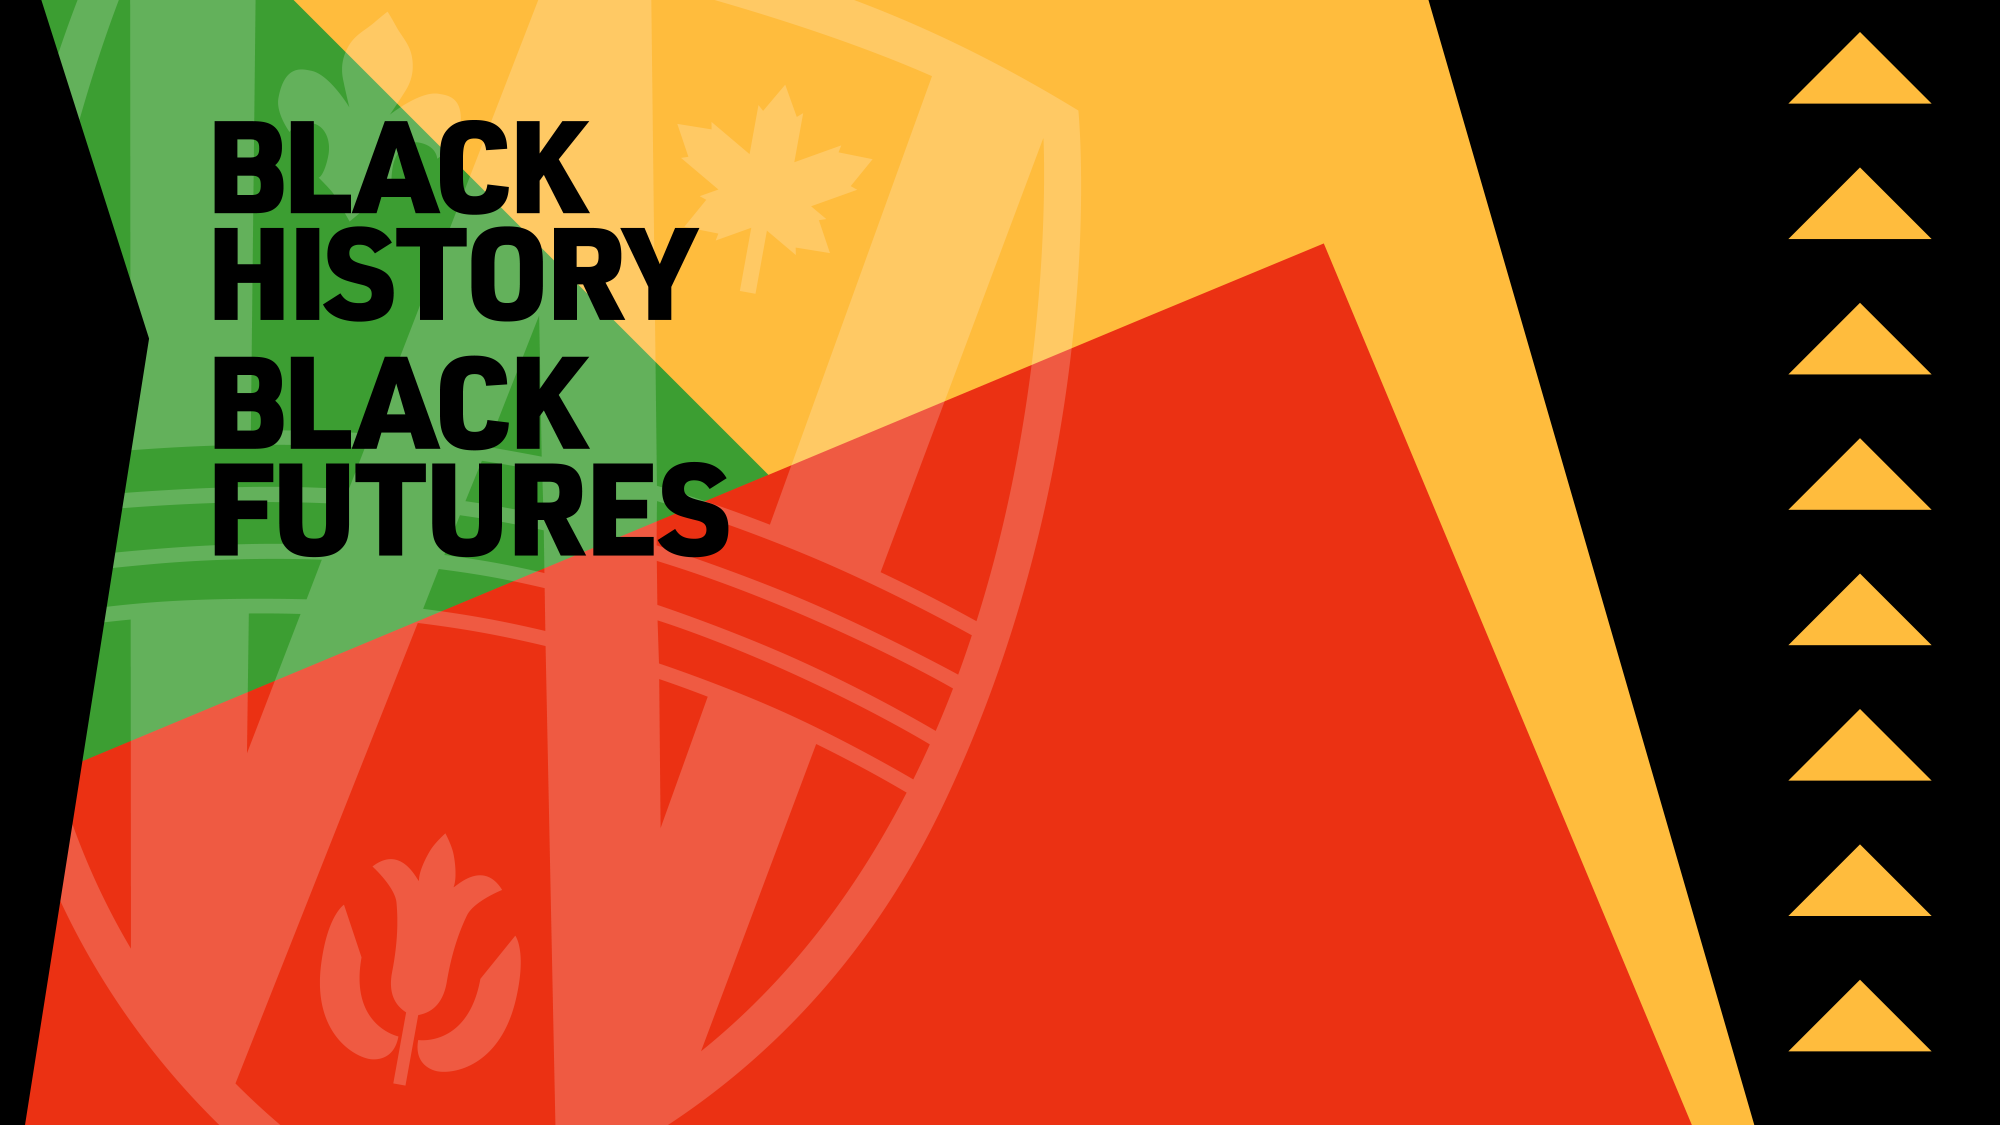 Black History Black Futures image using the Pan African flag